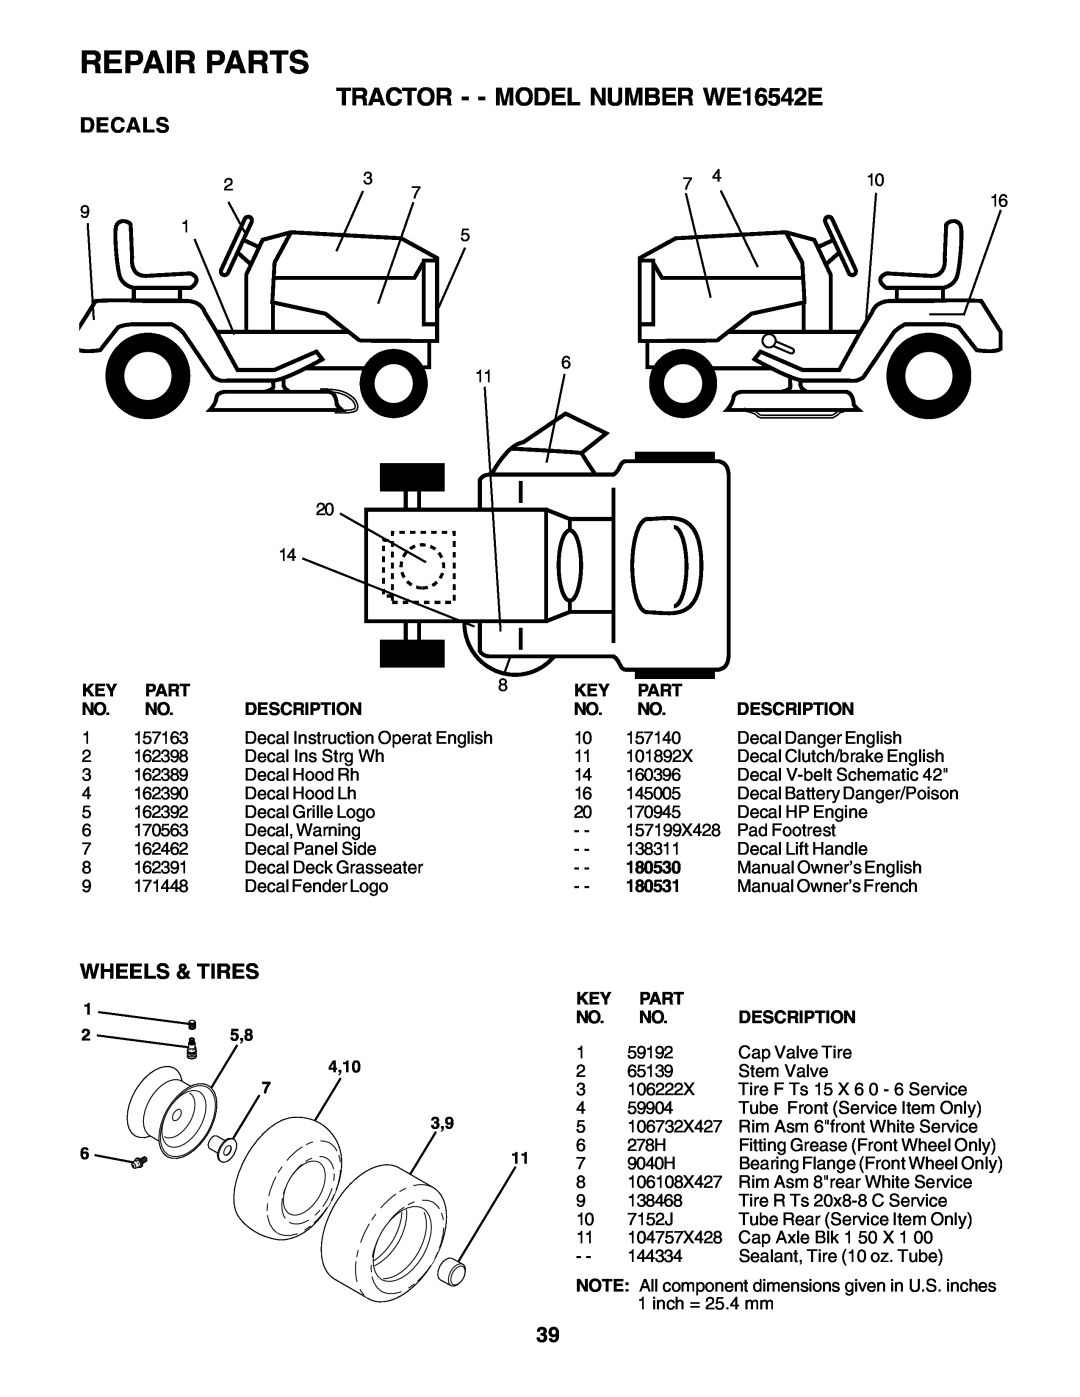 Weed Eater 180530 manual Repair Parts, TRACTOR - - MODEL NUMBER WE16542E, Decals, Wheels & Tires 